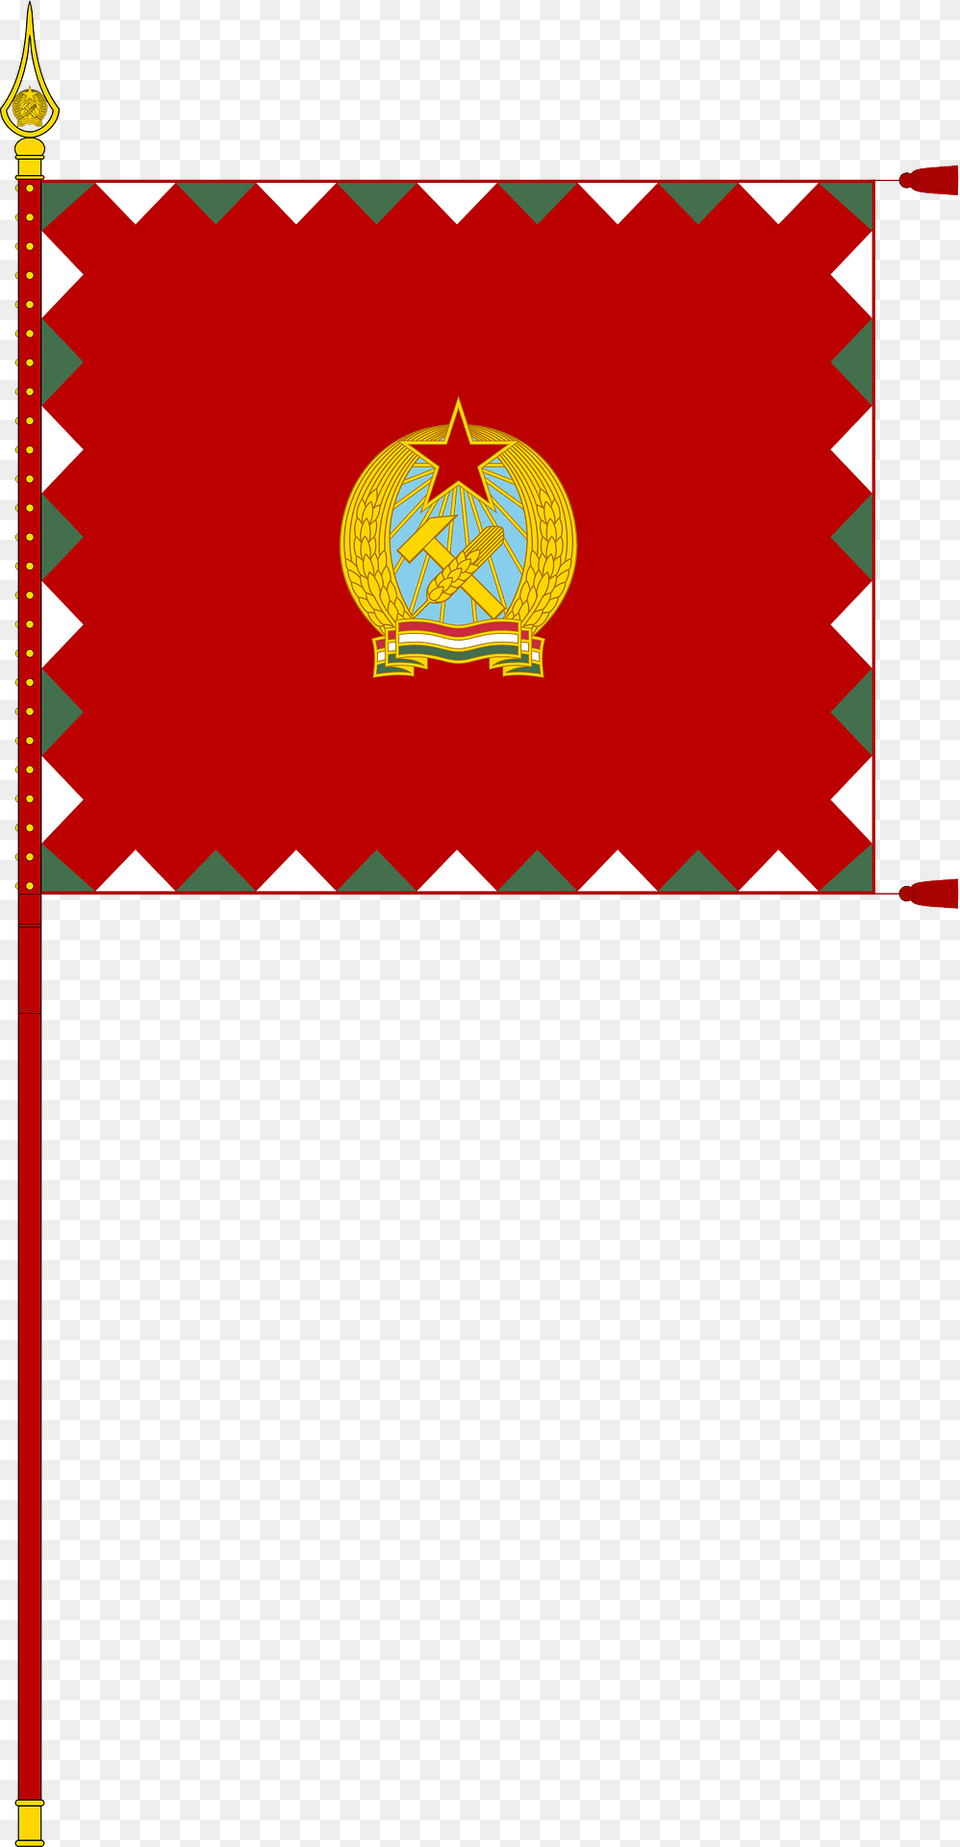 Infantry Colour Of The Hungarian People39s Army 1950 1957 With Staff Clipart Free Transparent Png